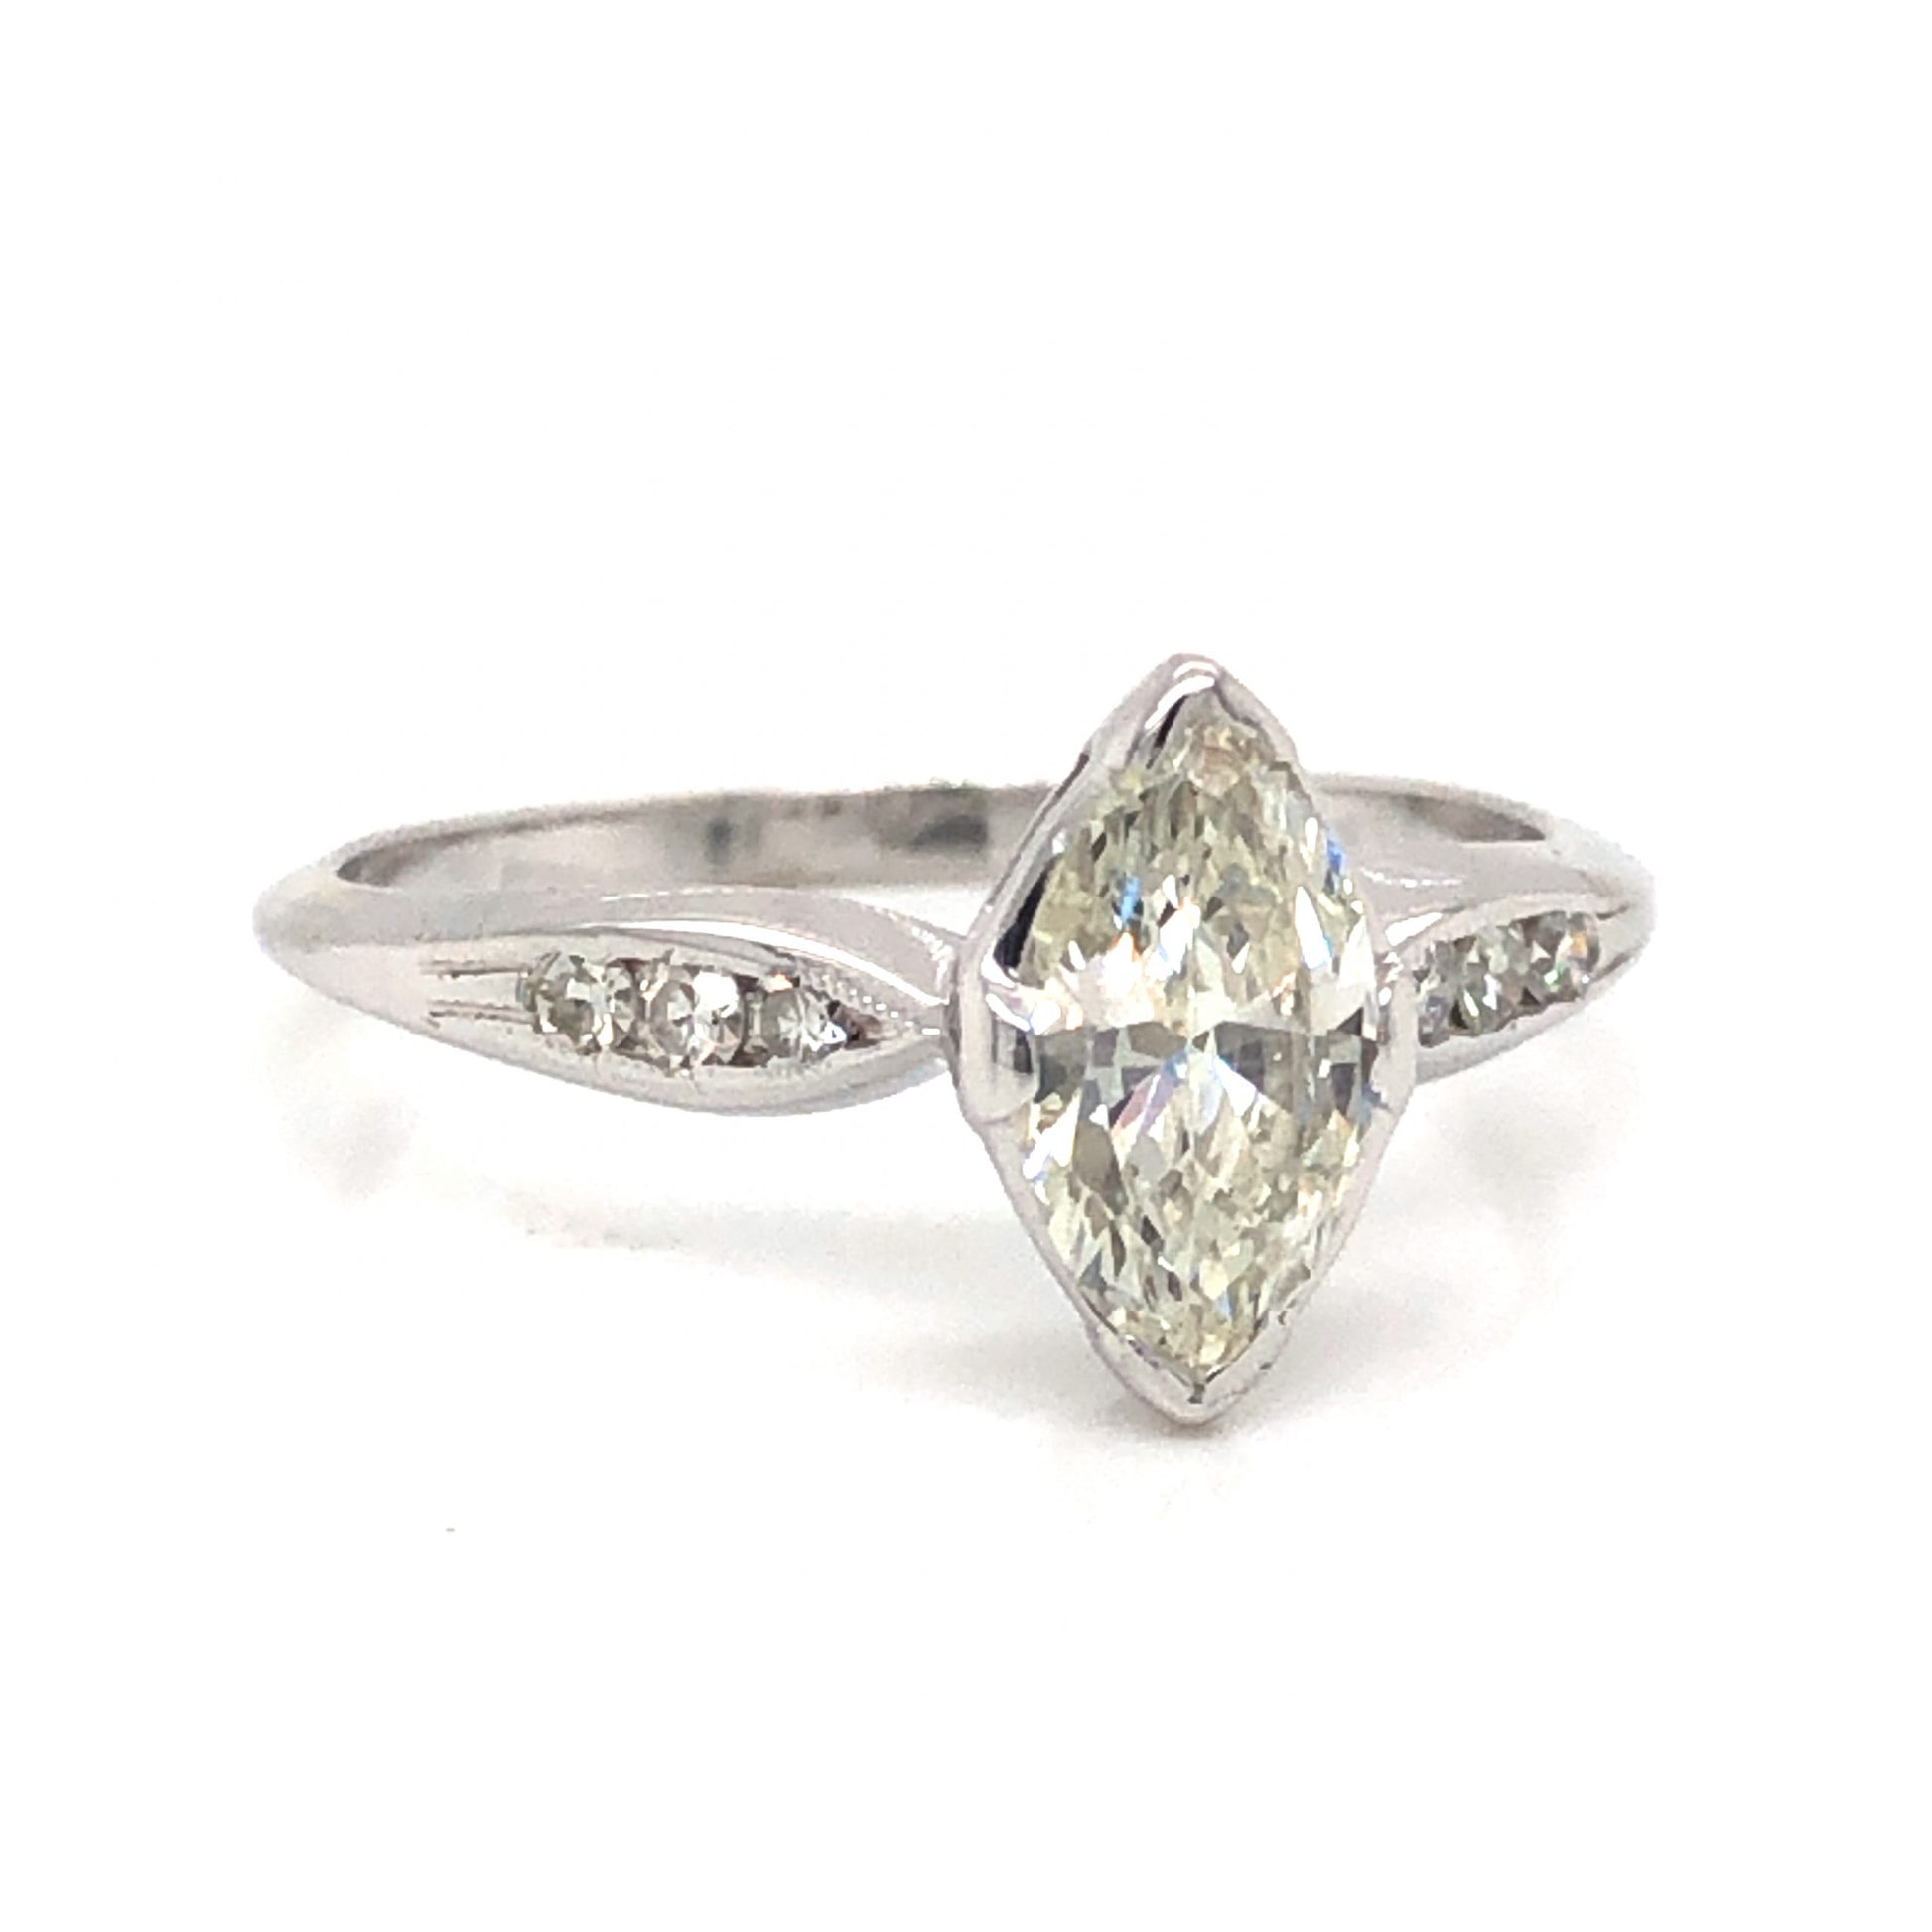 .75 Art Deco Marquise Diamond Engagement Ring in 18k White GoldComposition: 18 Karat White Gold Ring Size: 7 Total Diamond Weight: .955ct Total Gram Weight: 2.5 g Inscription: K & P , 18K
      